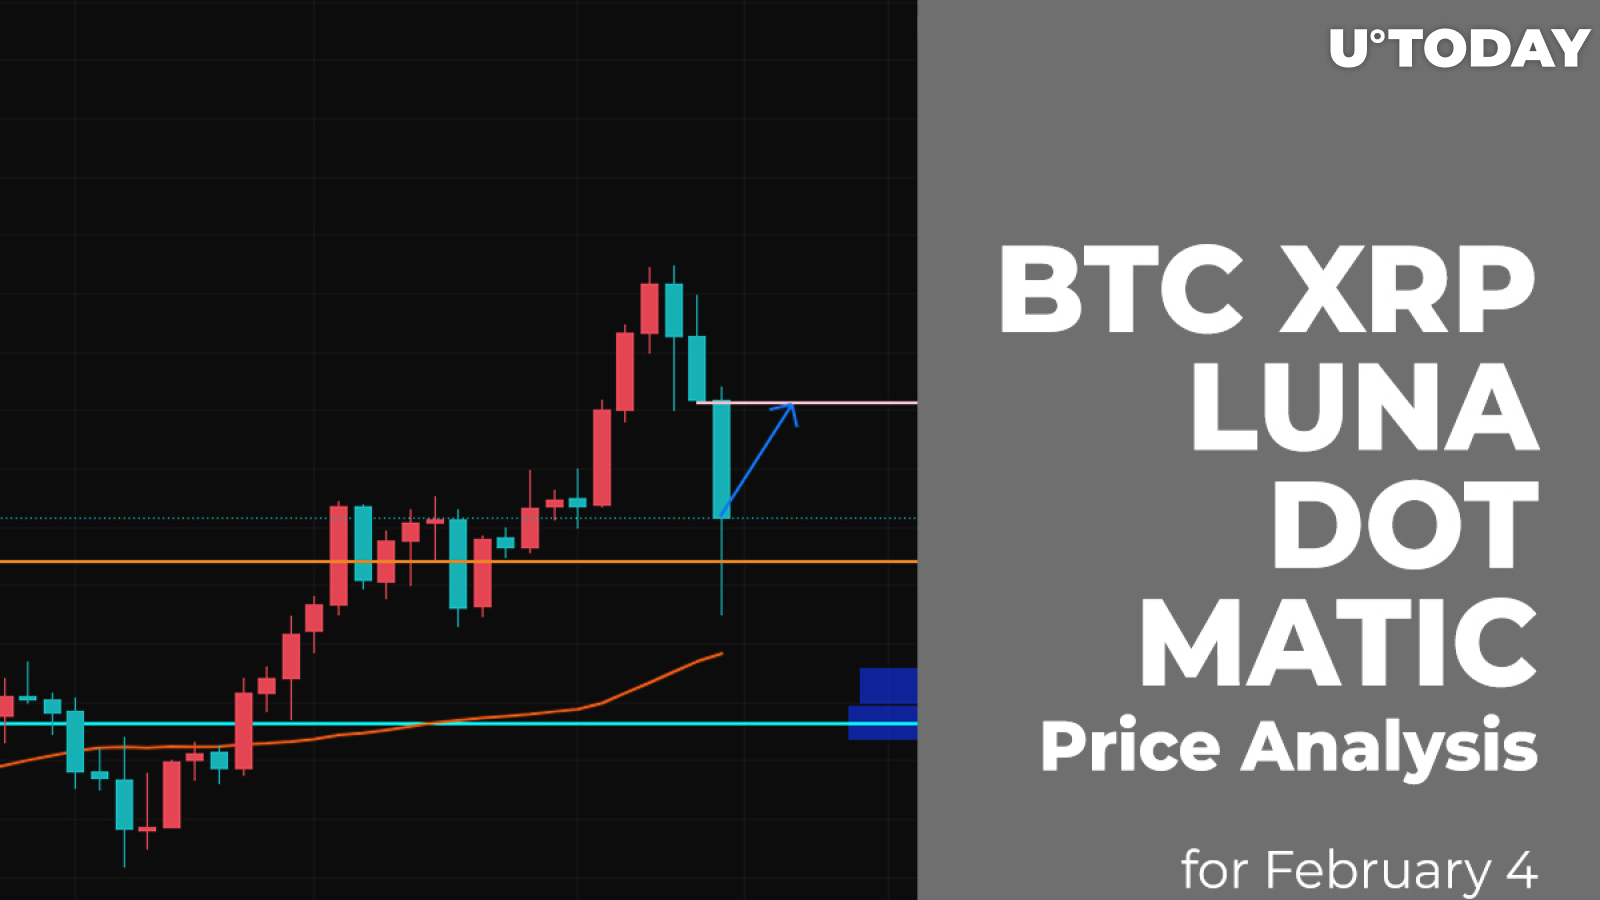 BTC, XRP, LUNA, DOT and MATIC Price Analysis for February 4